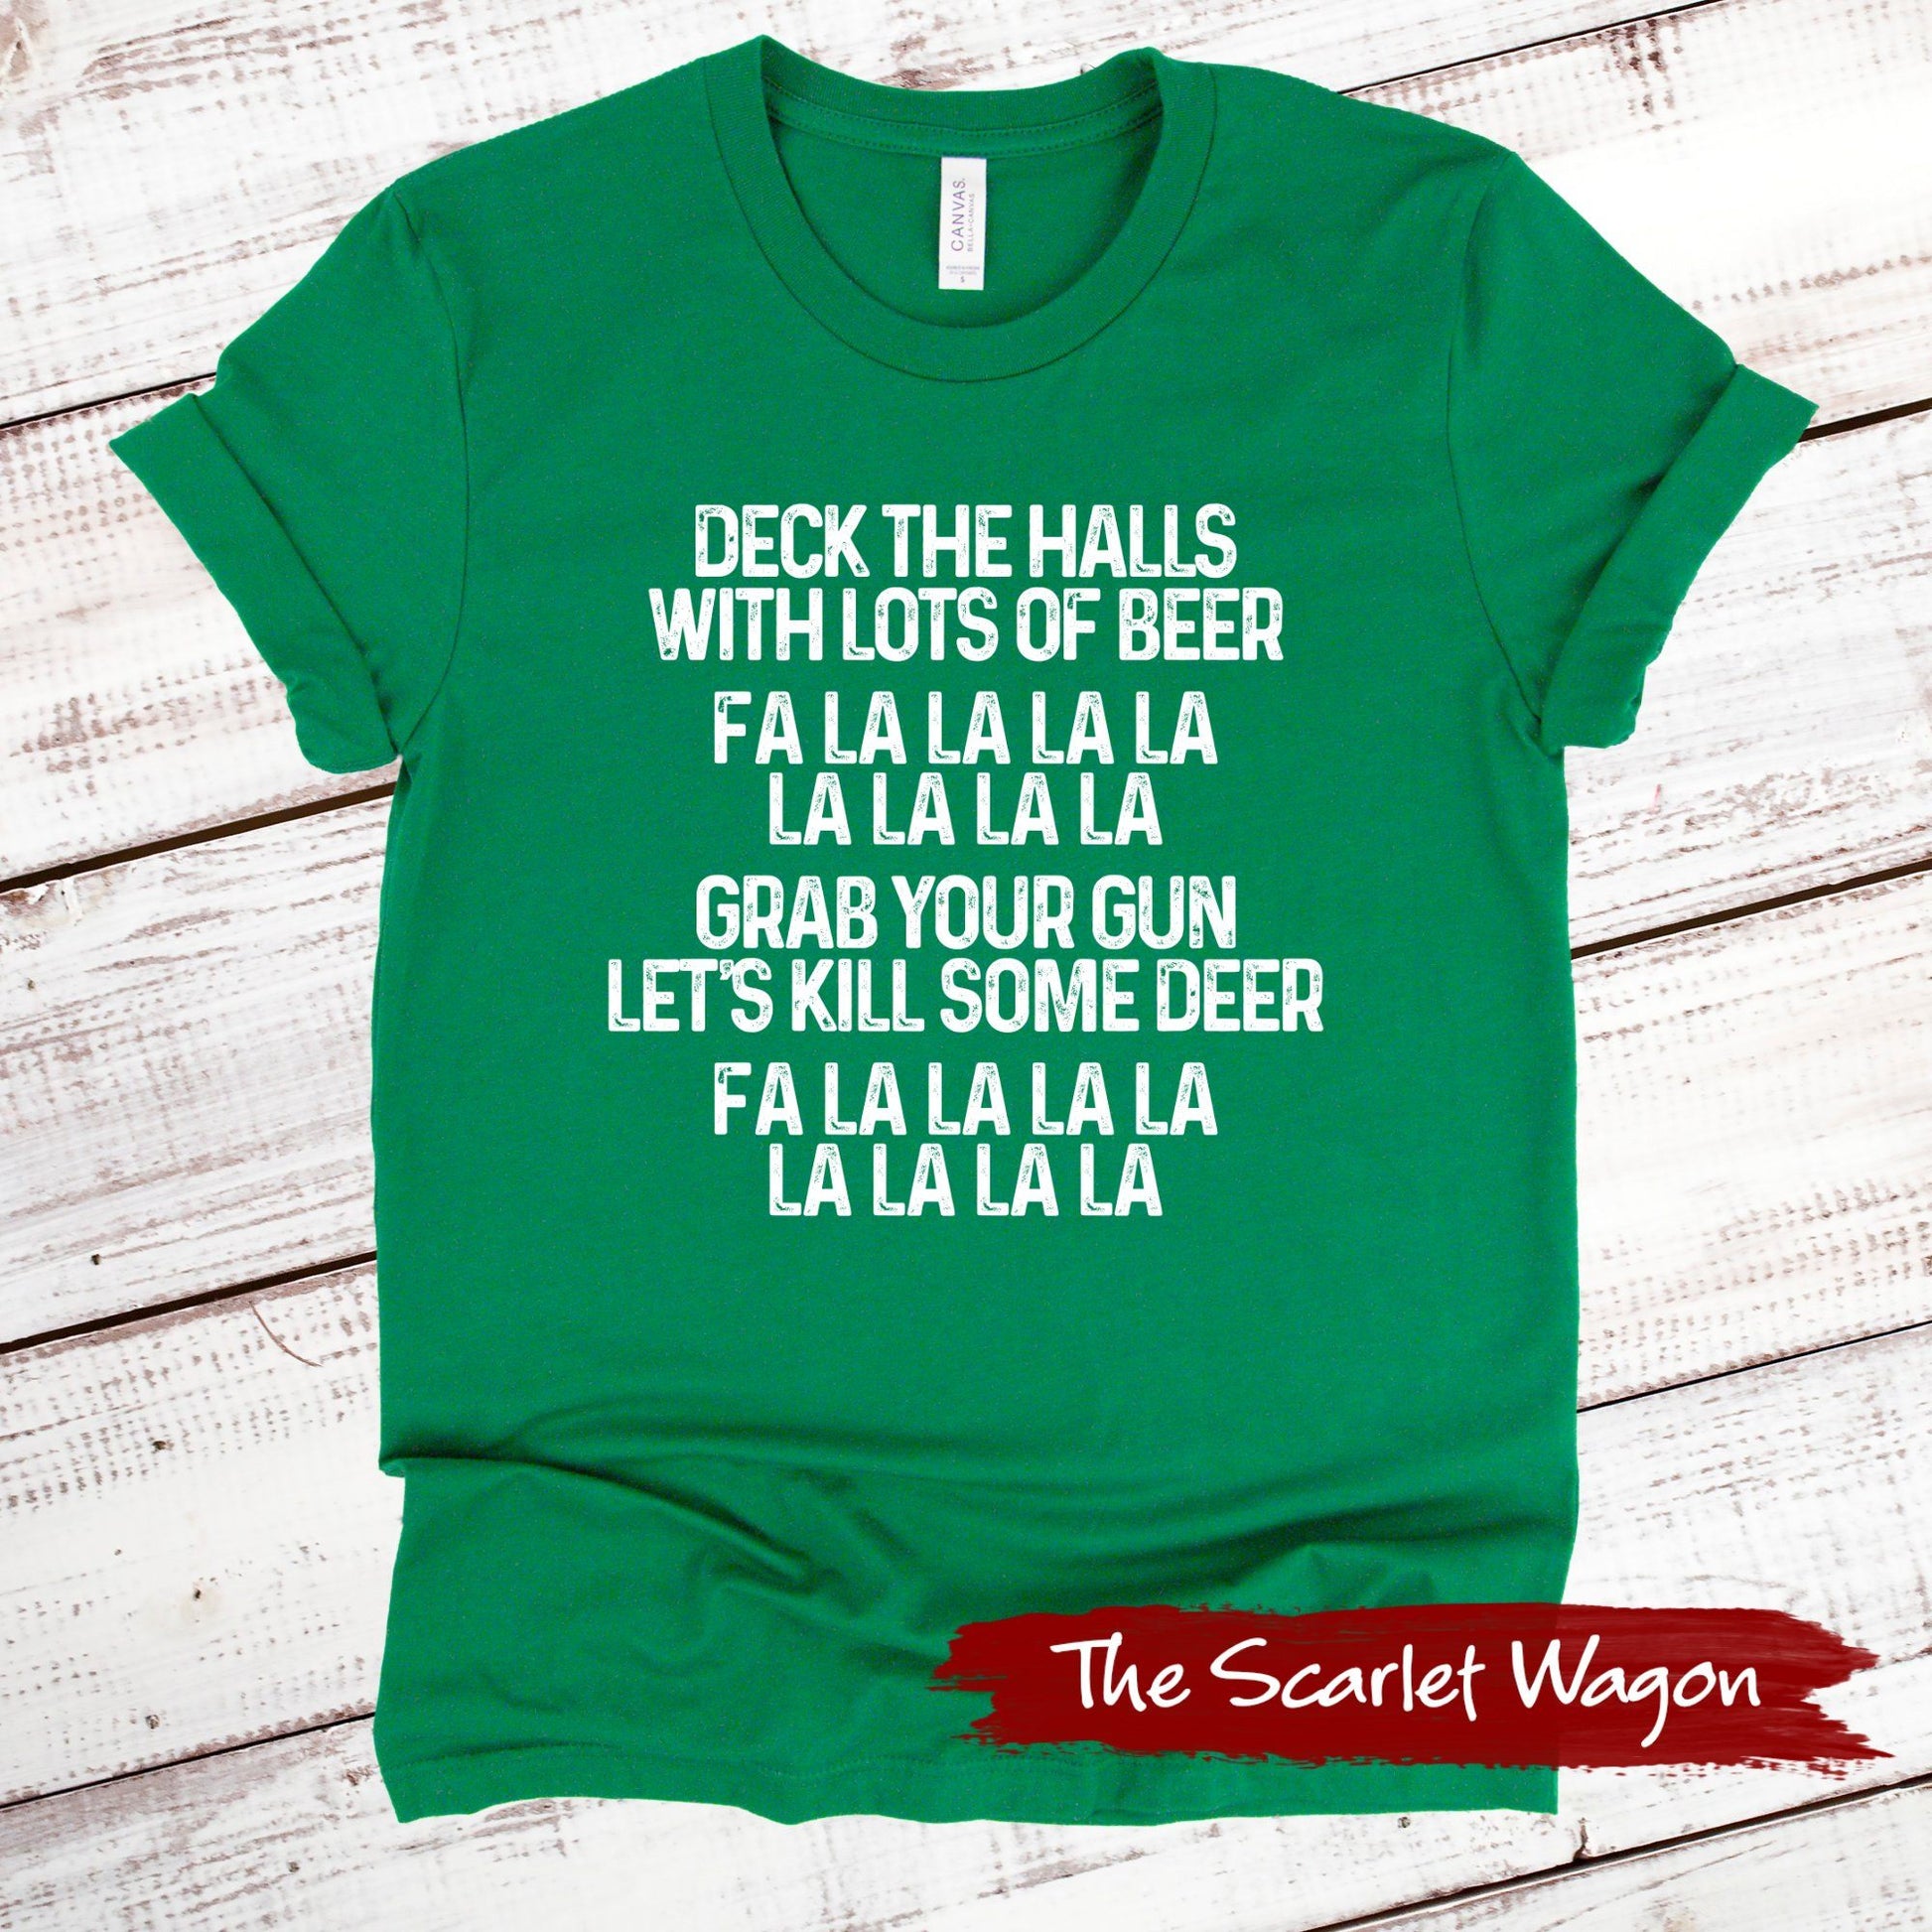 Deck the Halls with Lots of Beer Christmas Shirt Scarlet Wagon Green XS 